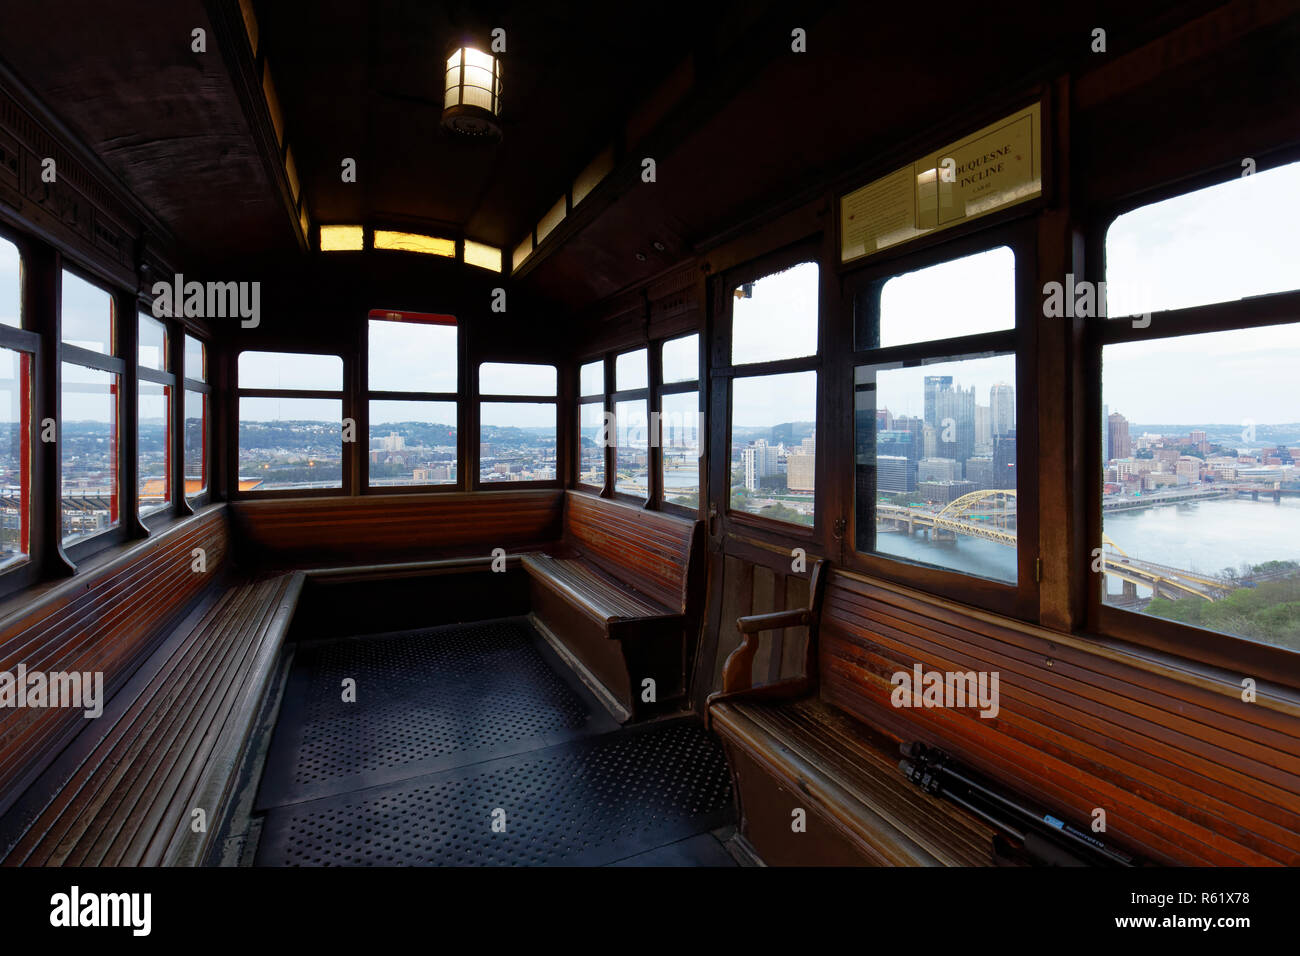 Wooden cabin of Duequesne Incline with view over Pittsburgh, Pennsylvania, United States Stock Photo